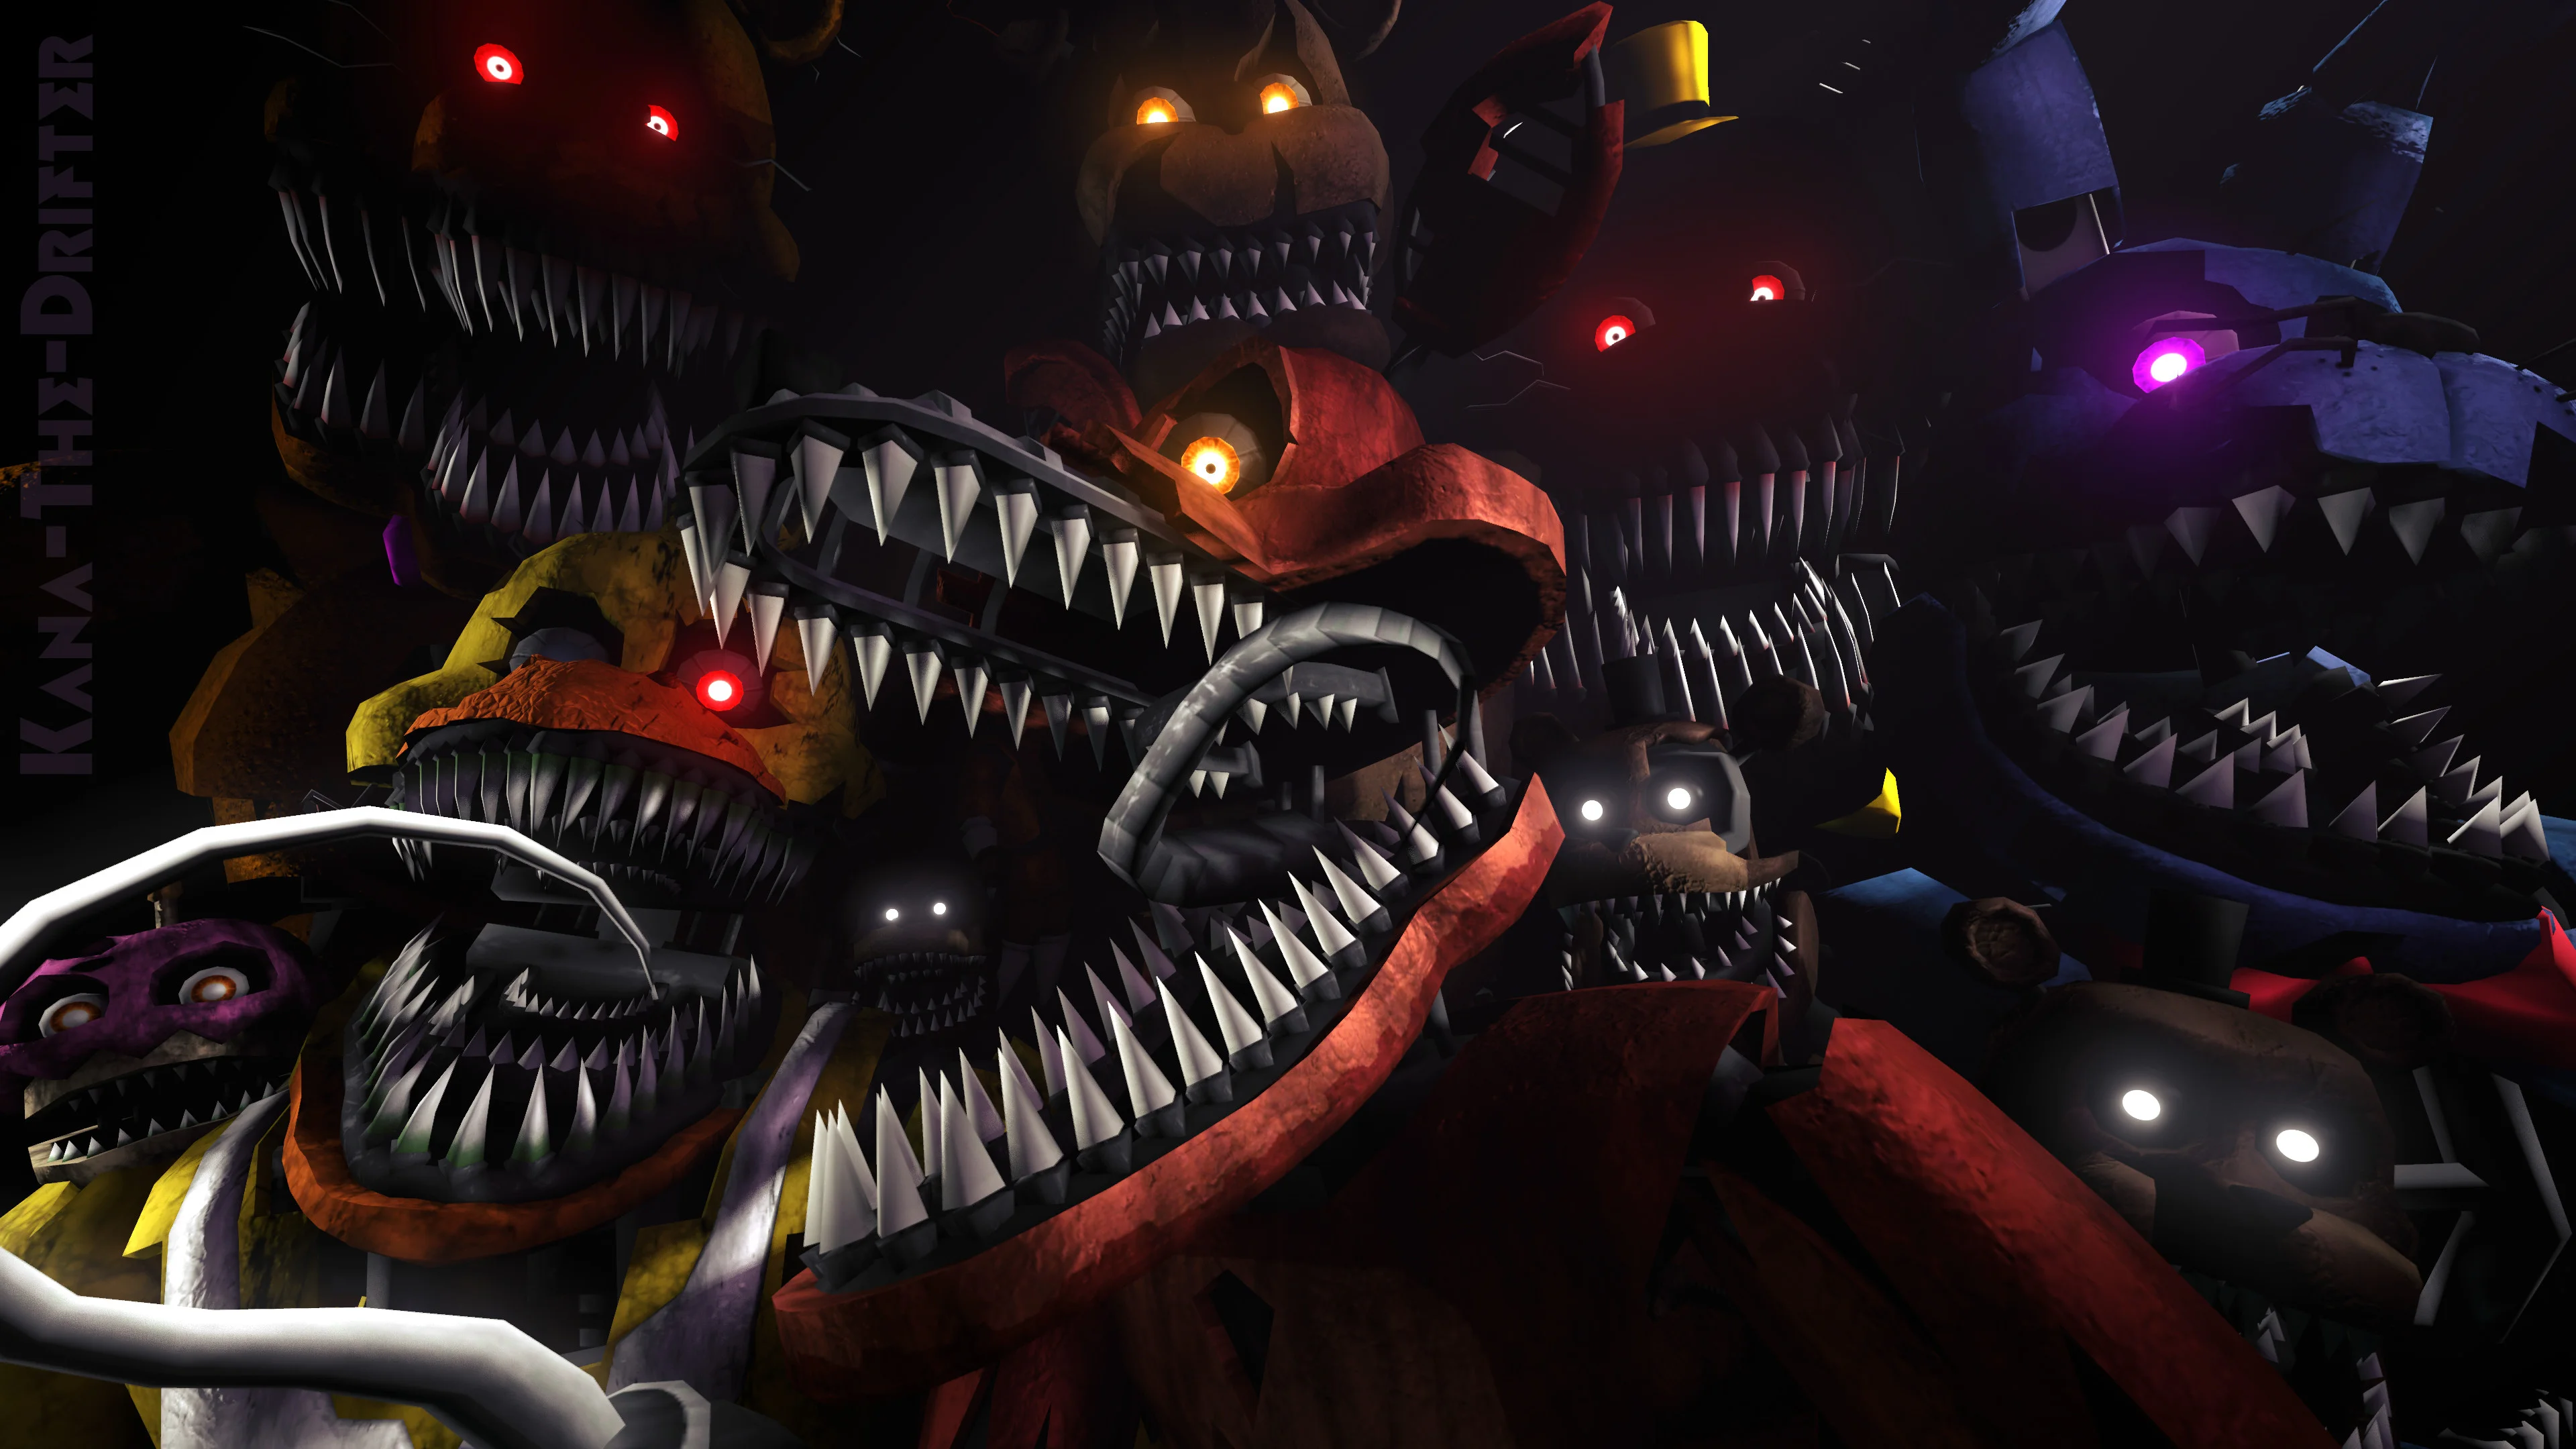 We'll Stay Here Forever (FNAF SFM Wallpaper) by Kana-The-